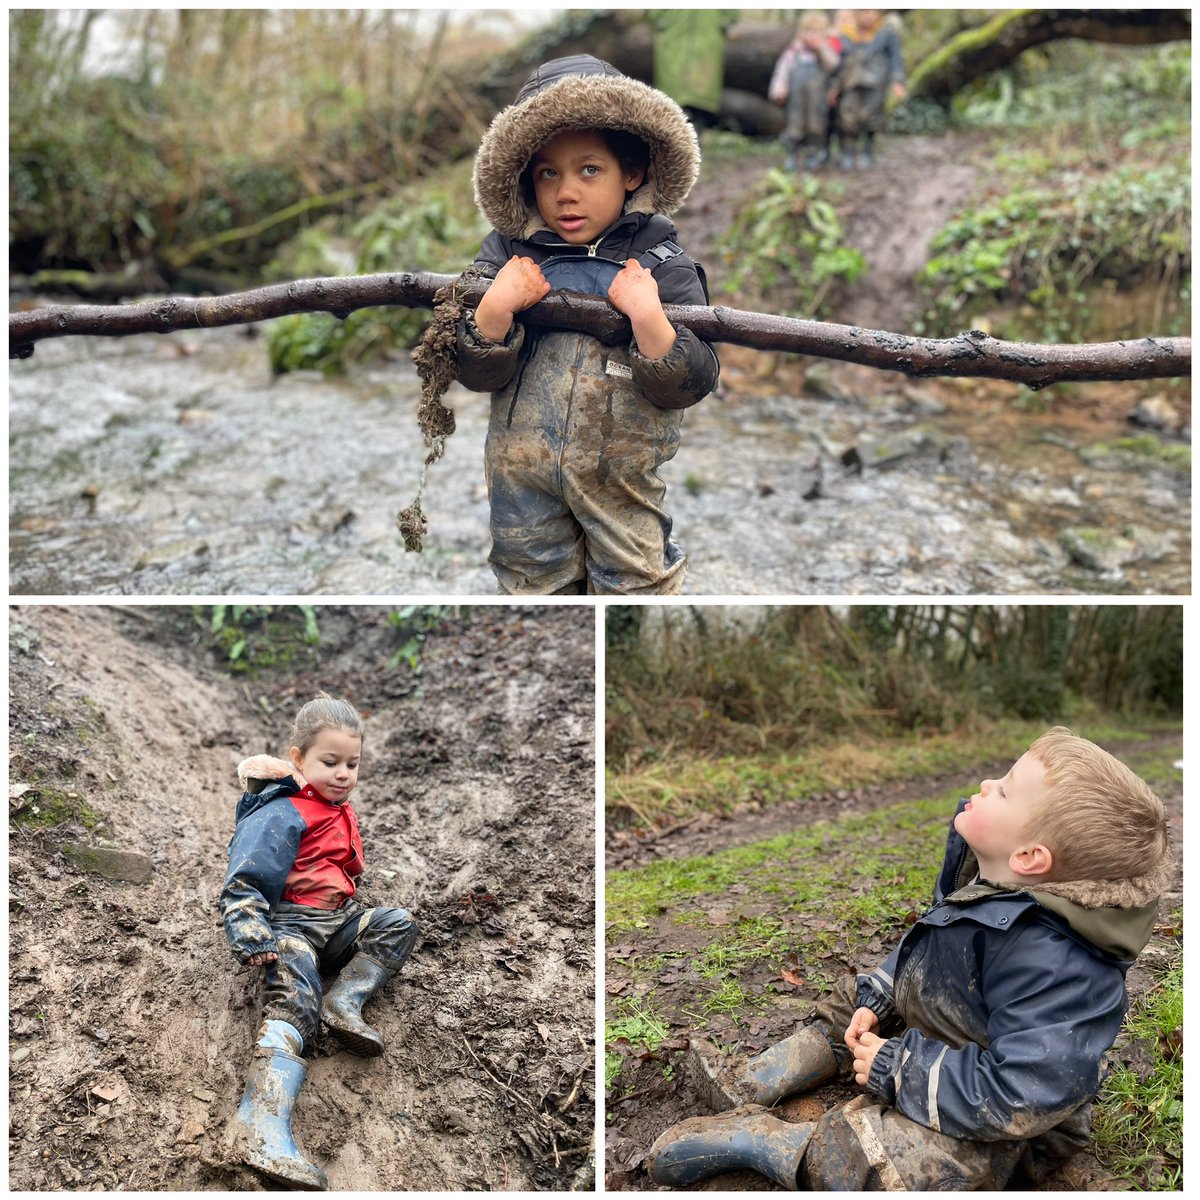 “The child should experience nature ‘in all its aspects – form, energy, substance, sound and colour” ~ Froebel 1967
#forestschool #earlyyearseducation #earlyyearsforestschool #lifelongskills #atonewithnature #handsonlearning #firsthandexperiences #froebel #learninginnature